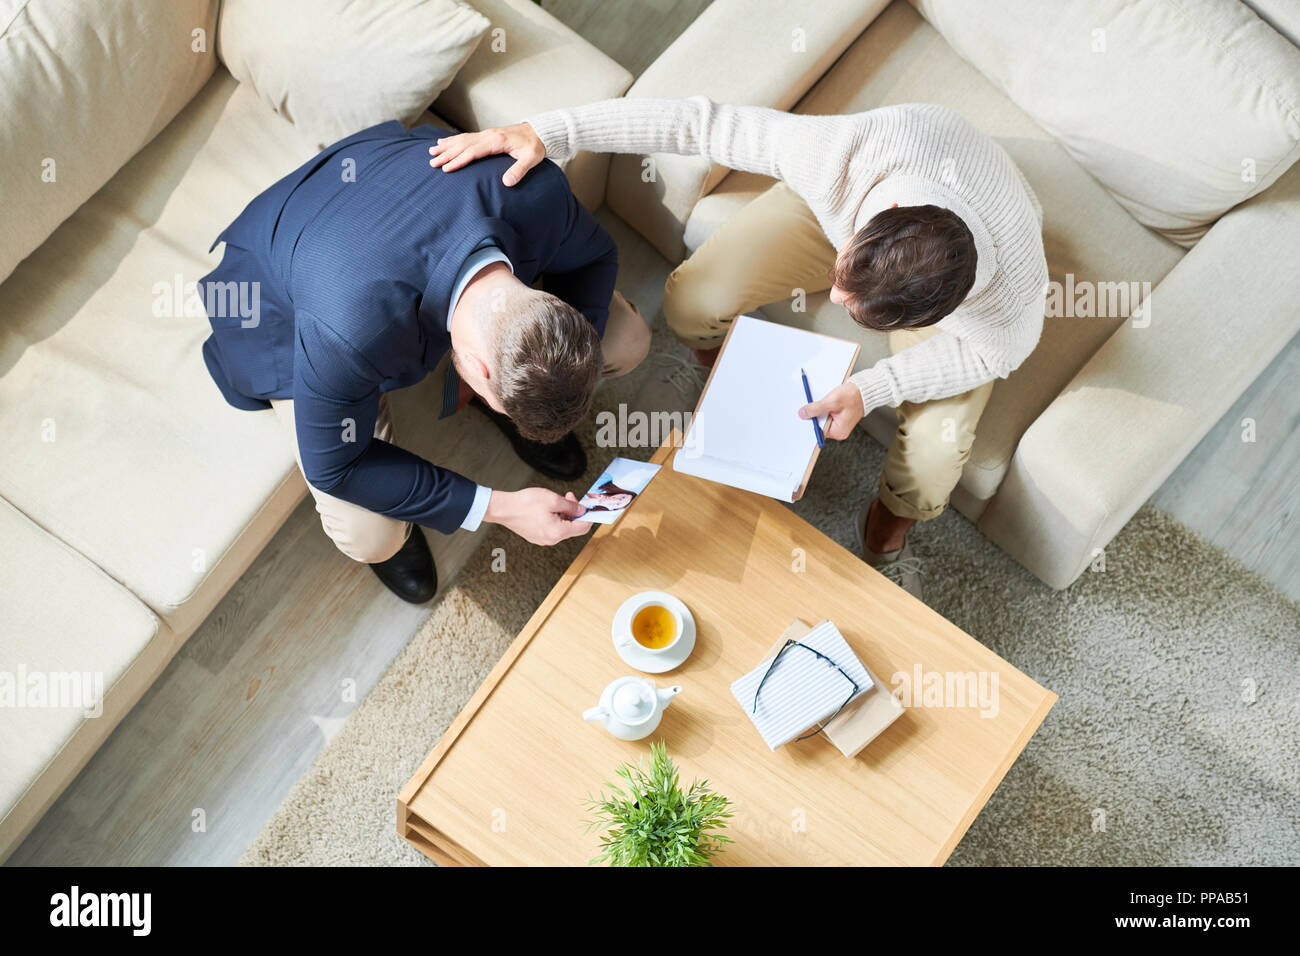 Above view portrait of psychiatrist consulting grieving young man holding photo of wife, copy space Stock Photo